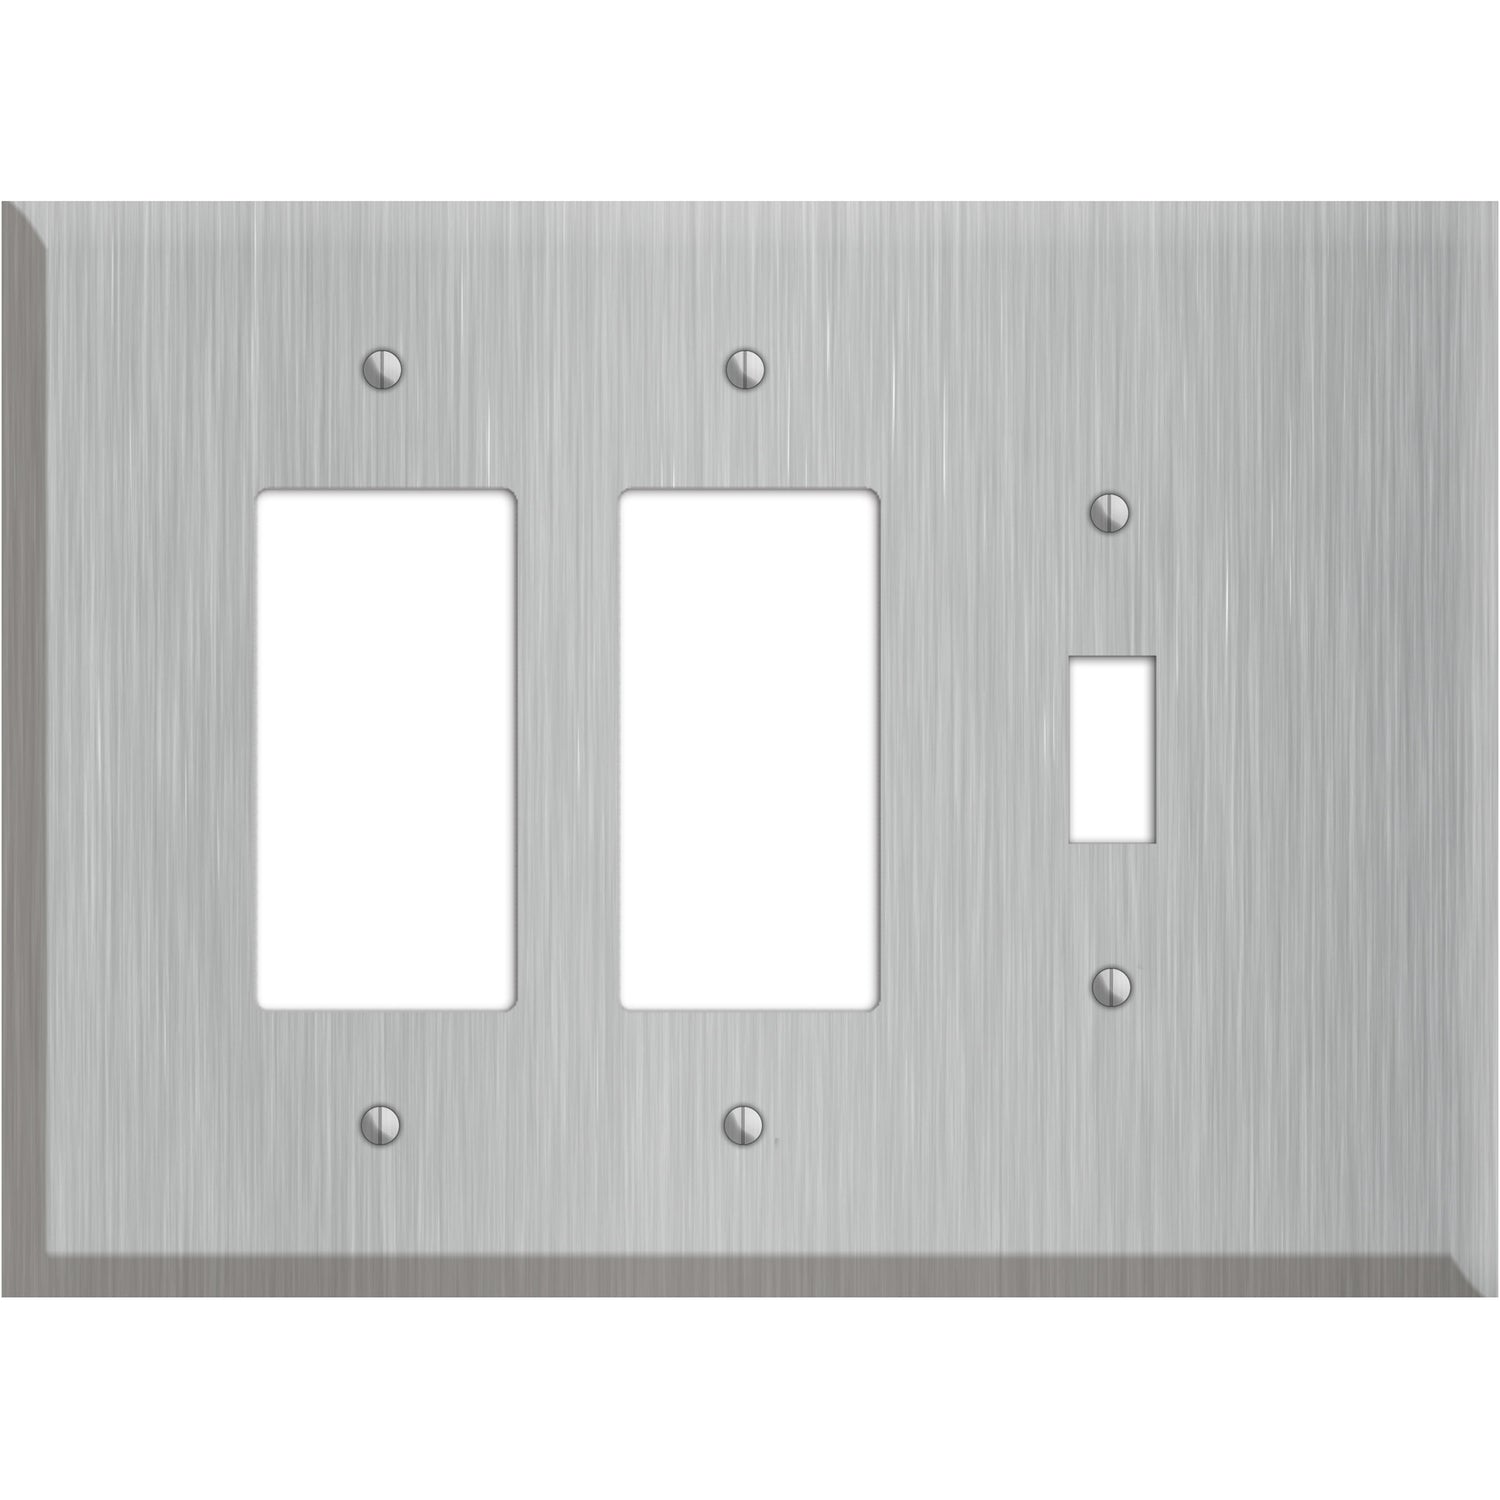 Oversized Discontinued Stainless Steel 2 Rocker / Toggle Wallplate